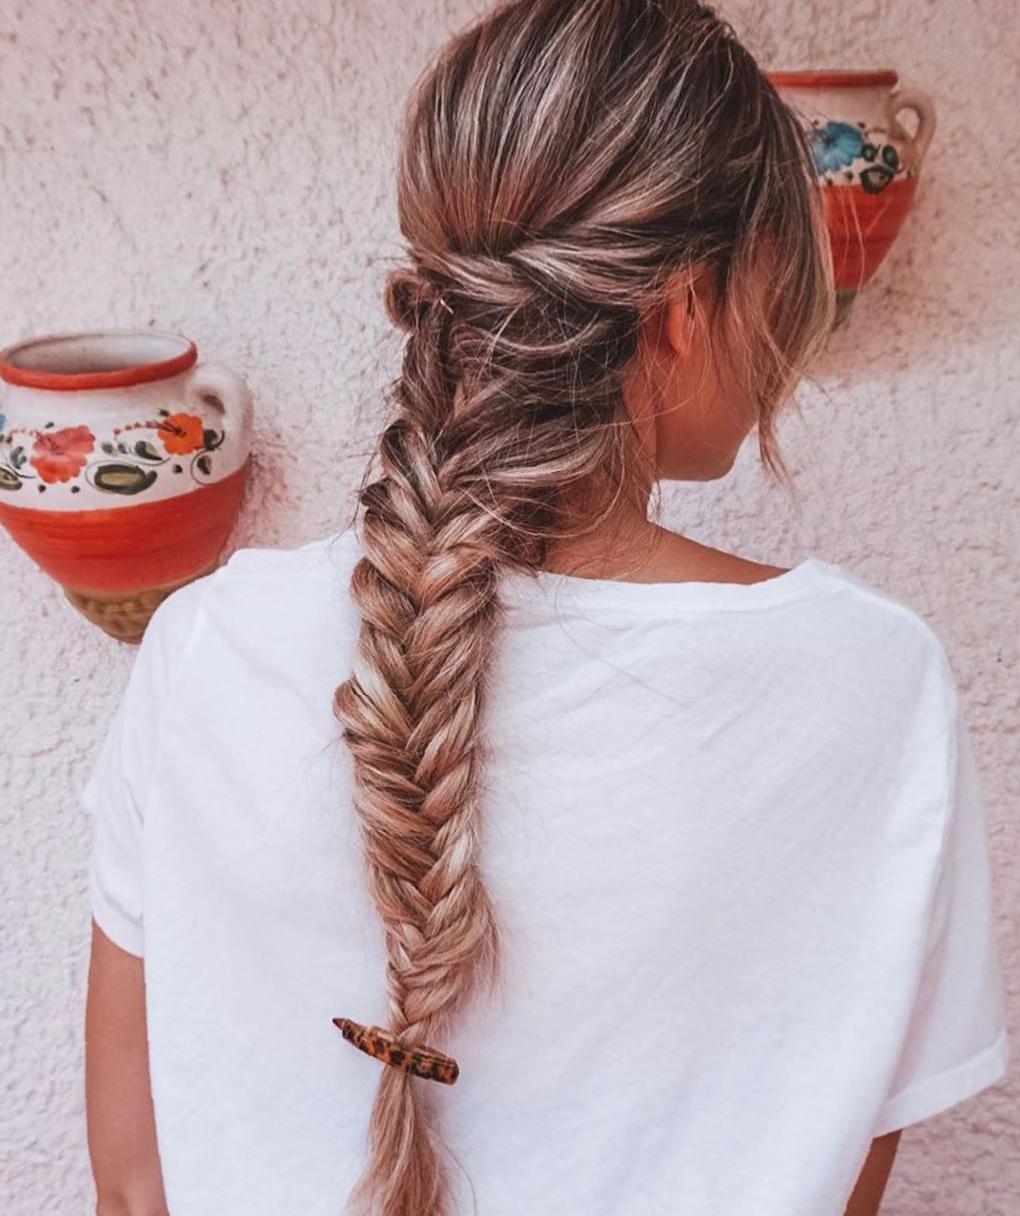 35 Amazing Braided Hairstyles for Long Hair for Summer braid hairstyle for long hair, braid hairstyles, long hairstyles, hairstyles for teens, hairstyles for girls